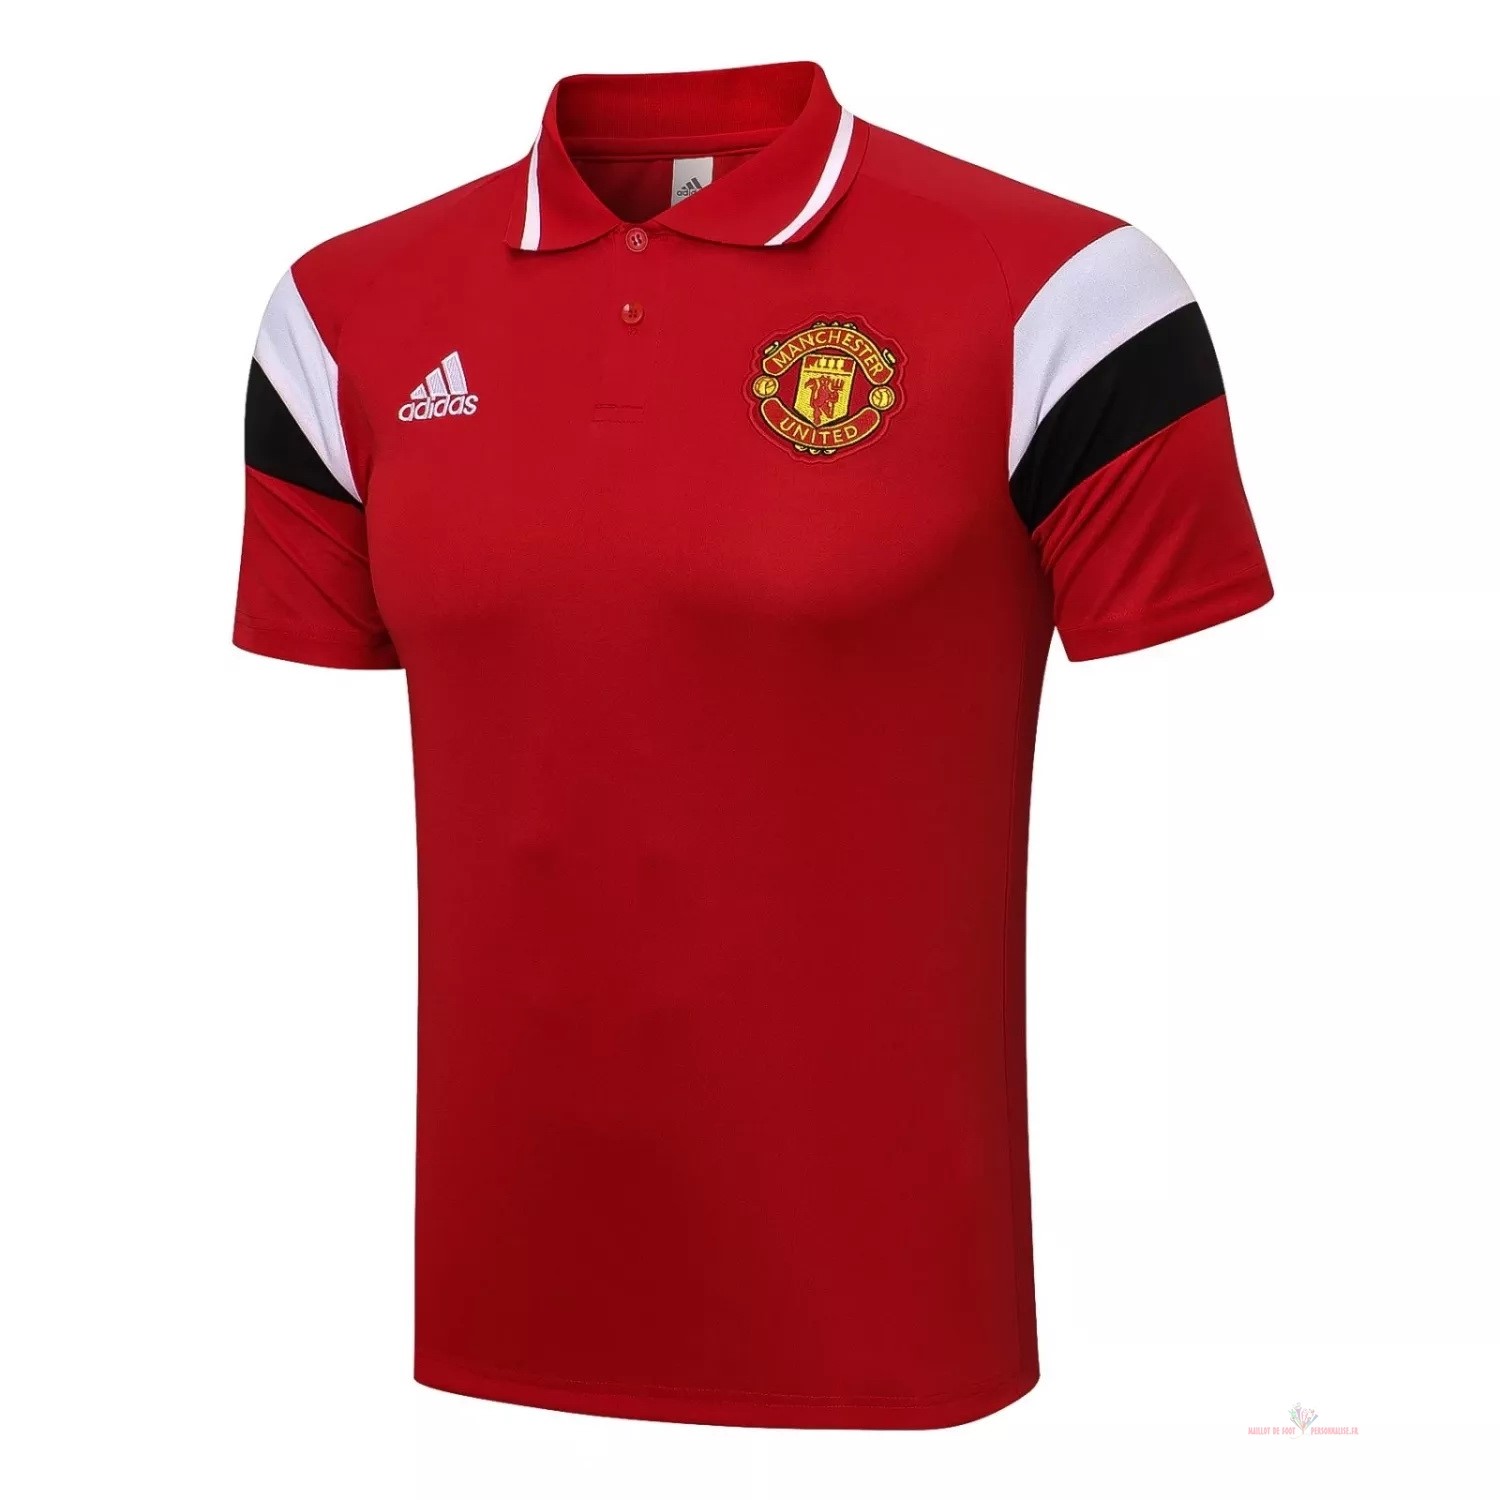 Maillot Om Pas Cher adidas Polo Manchester United 2021 2022 Rouge Blanc Noir